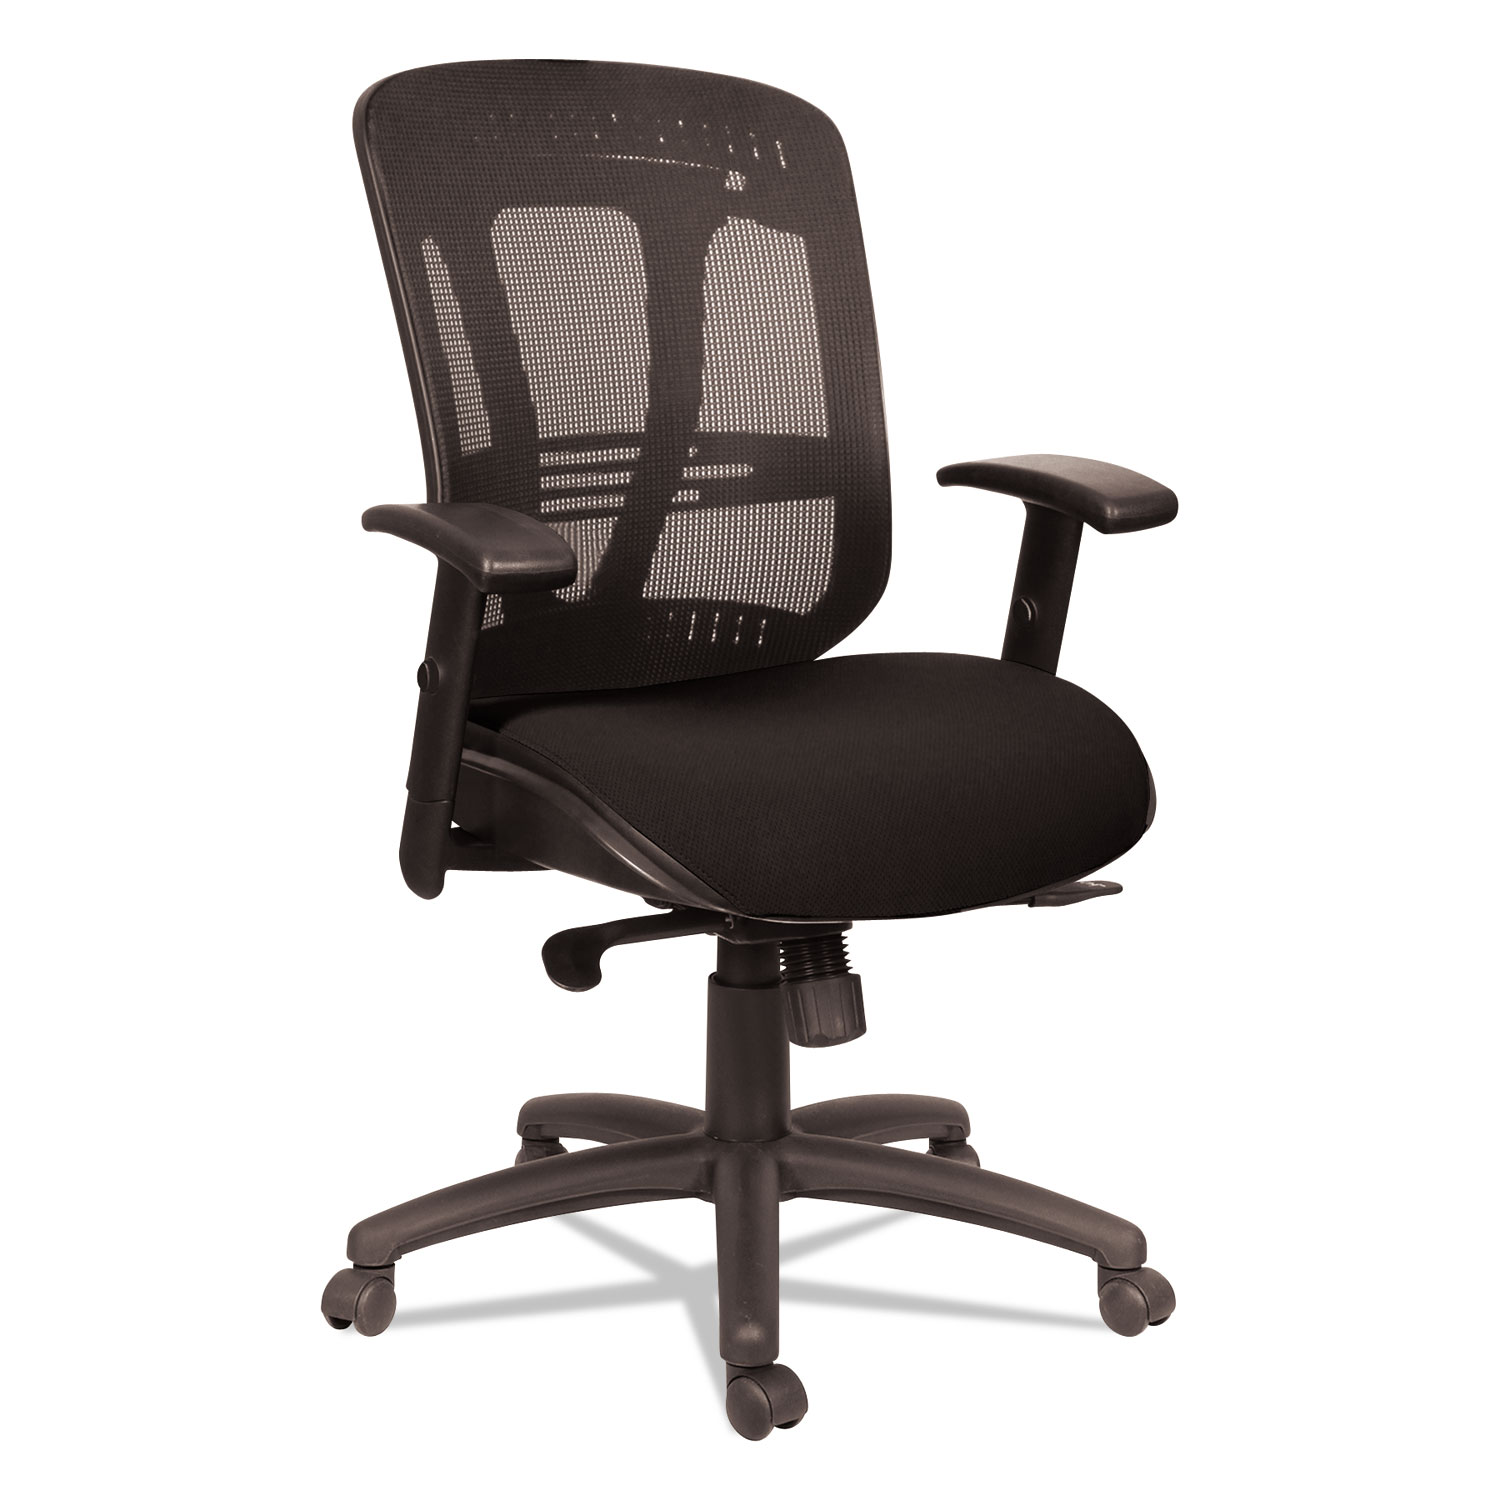  Alera ALEEN4217 Alera Eon Series Multifunction Mid-Back Cushioned Mesh Chair, Supports up to 275 lbs., Black Seat/Black Back, Black Base (ALEEN4217) 